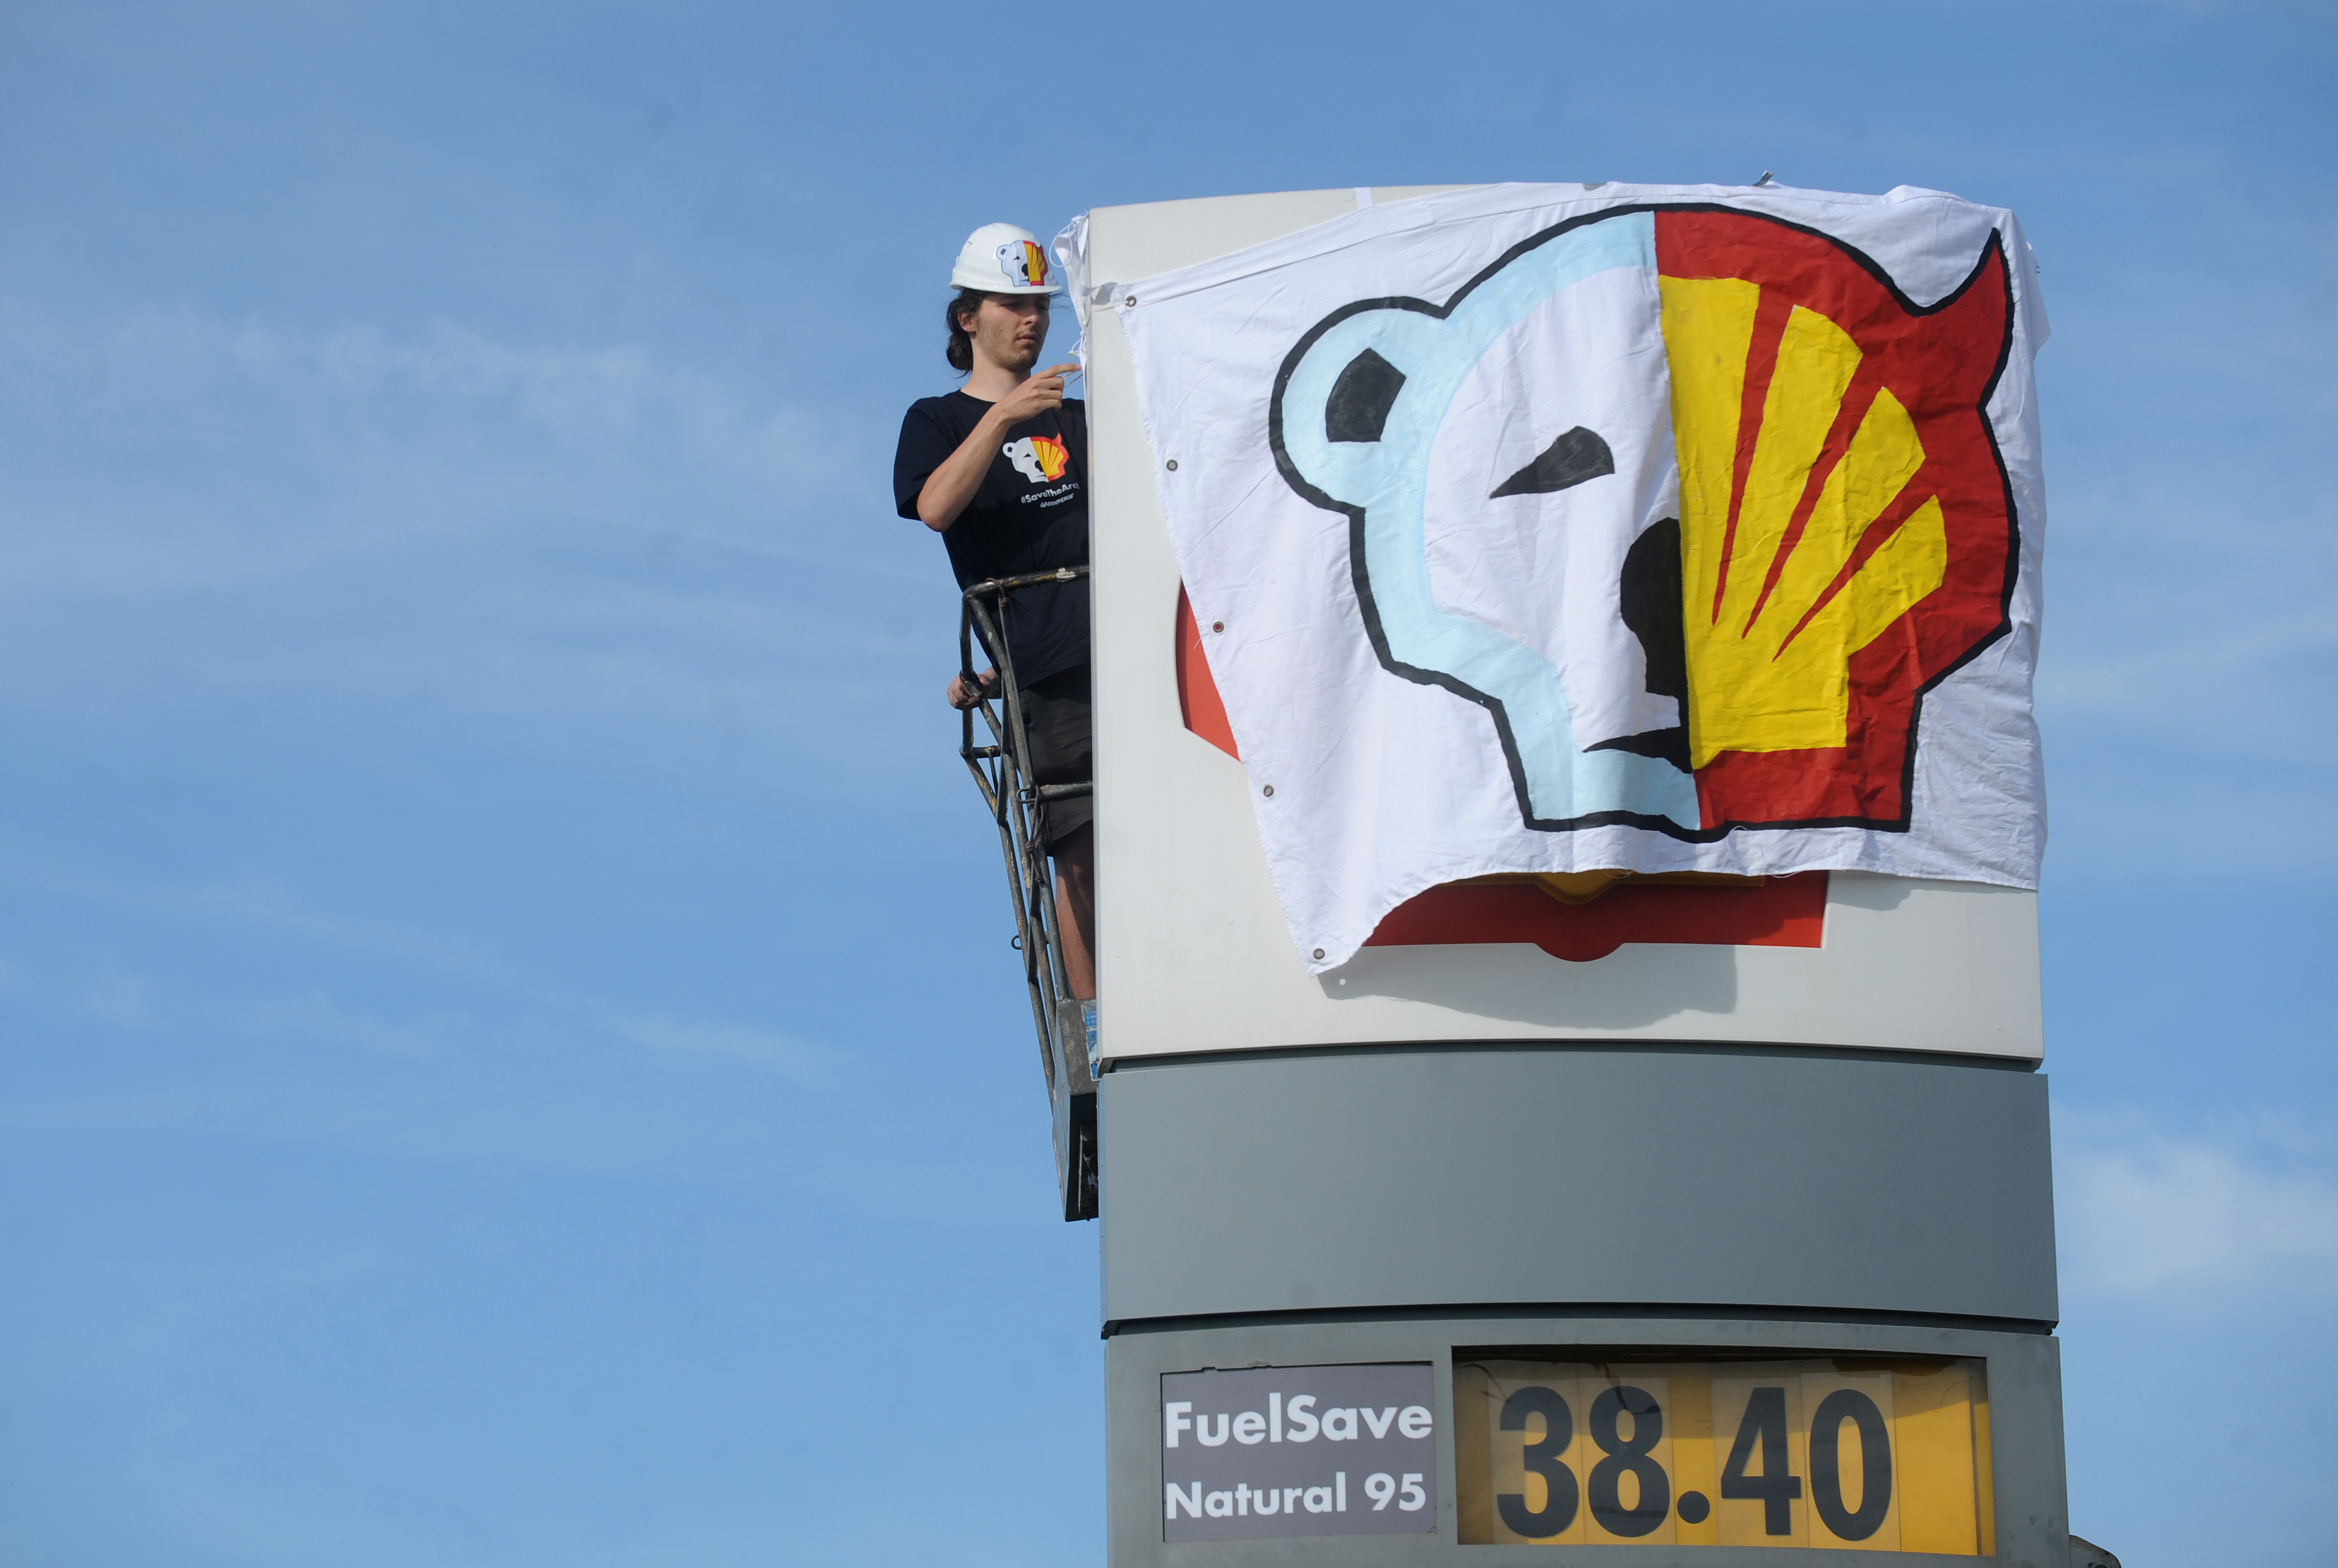 A Greenpeace activist covers the logo of